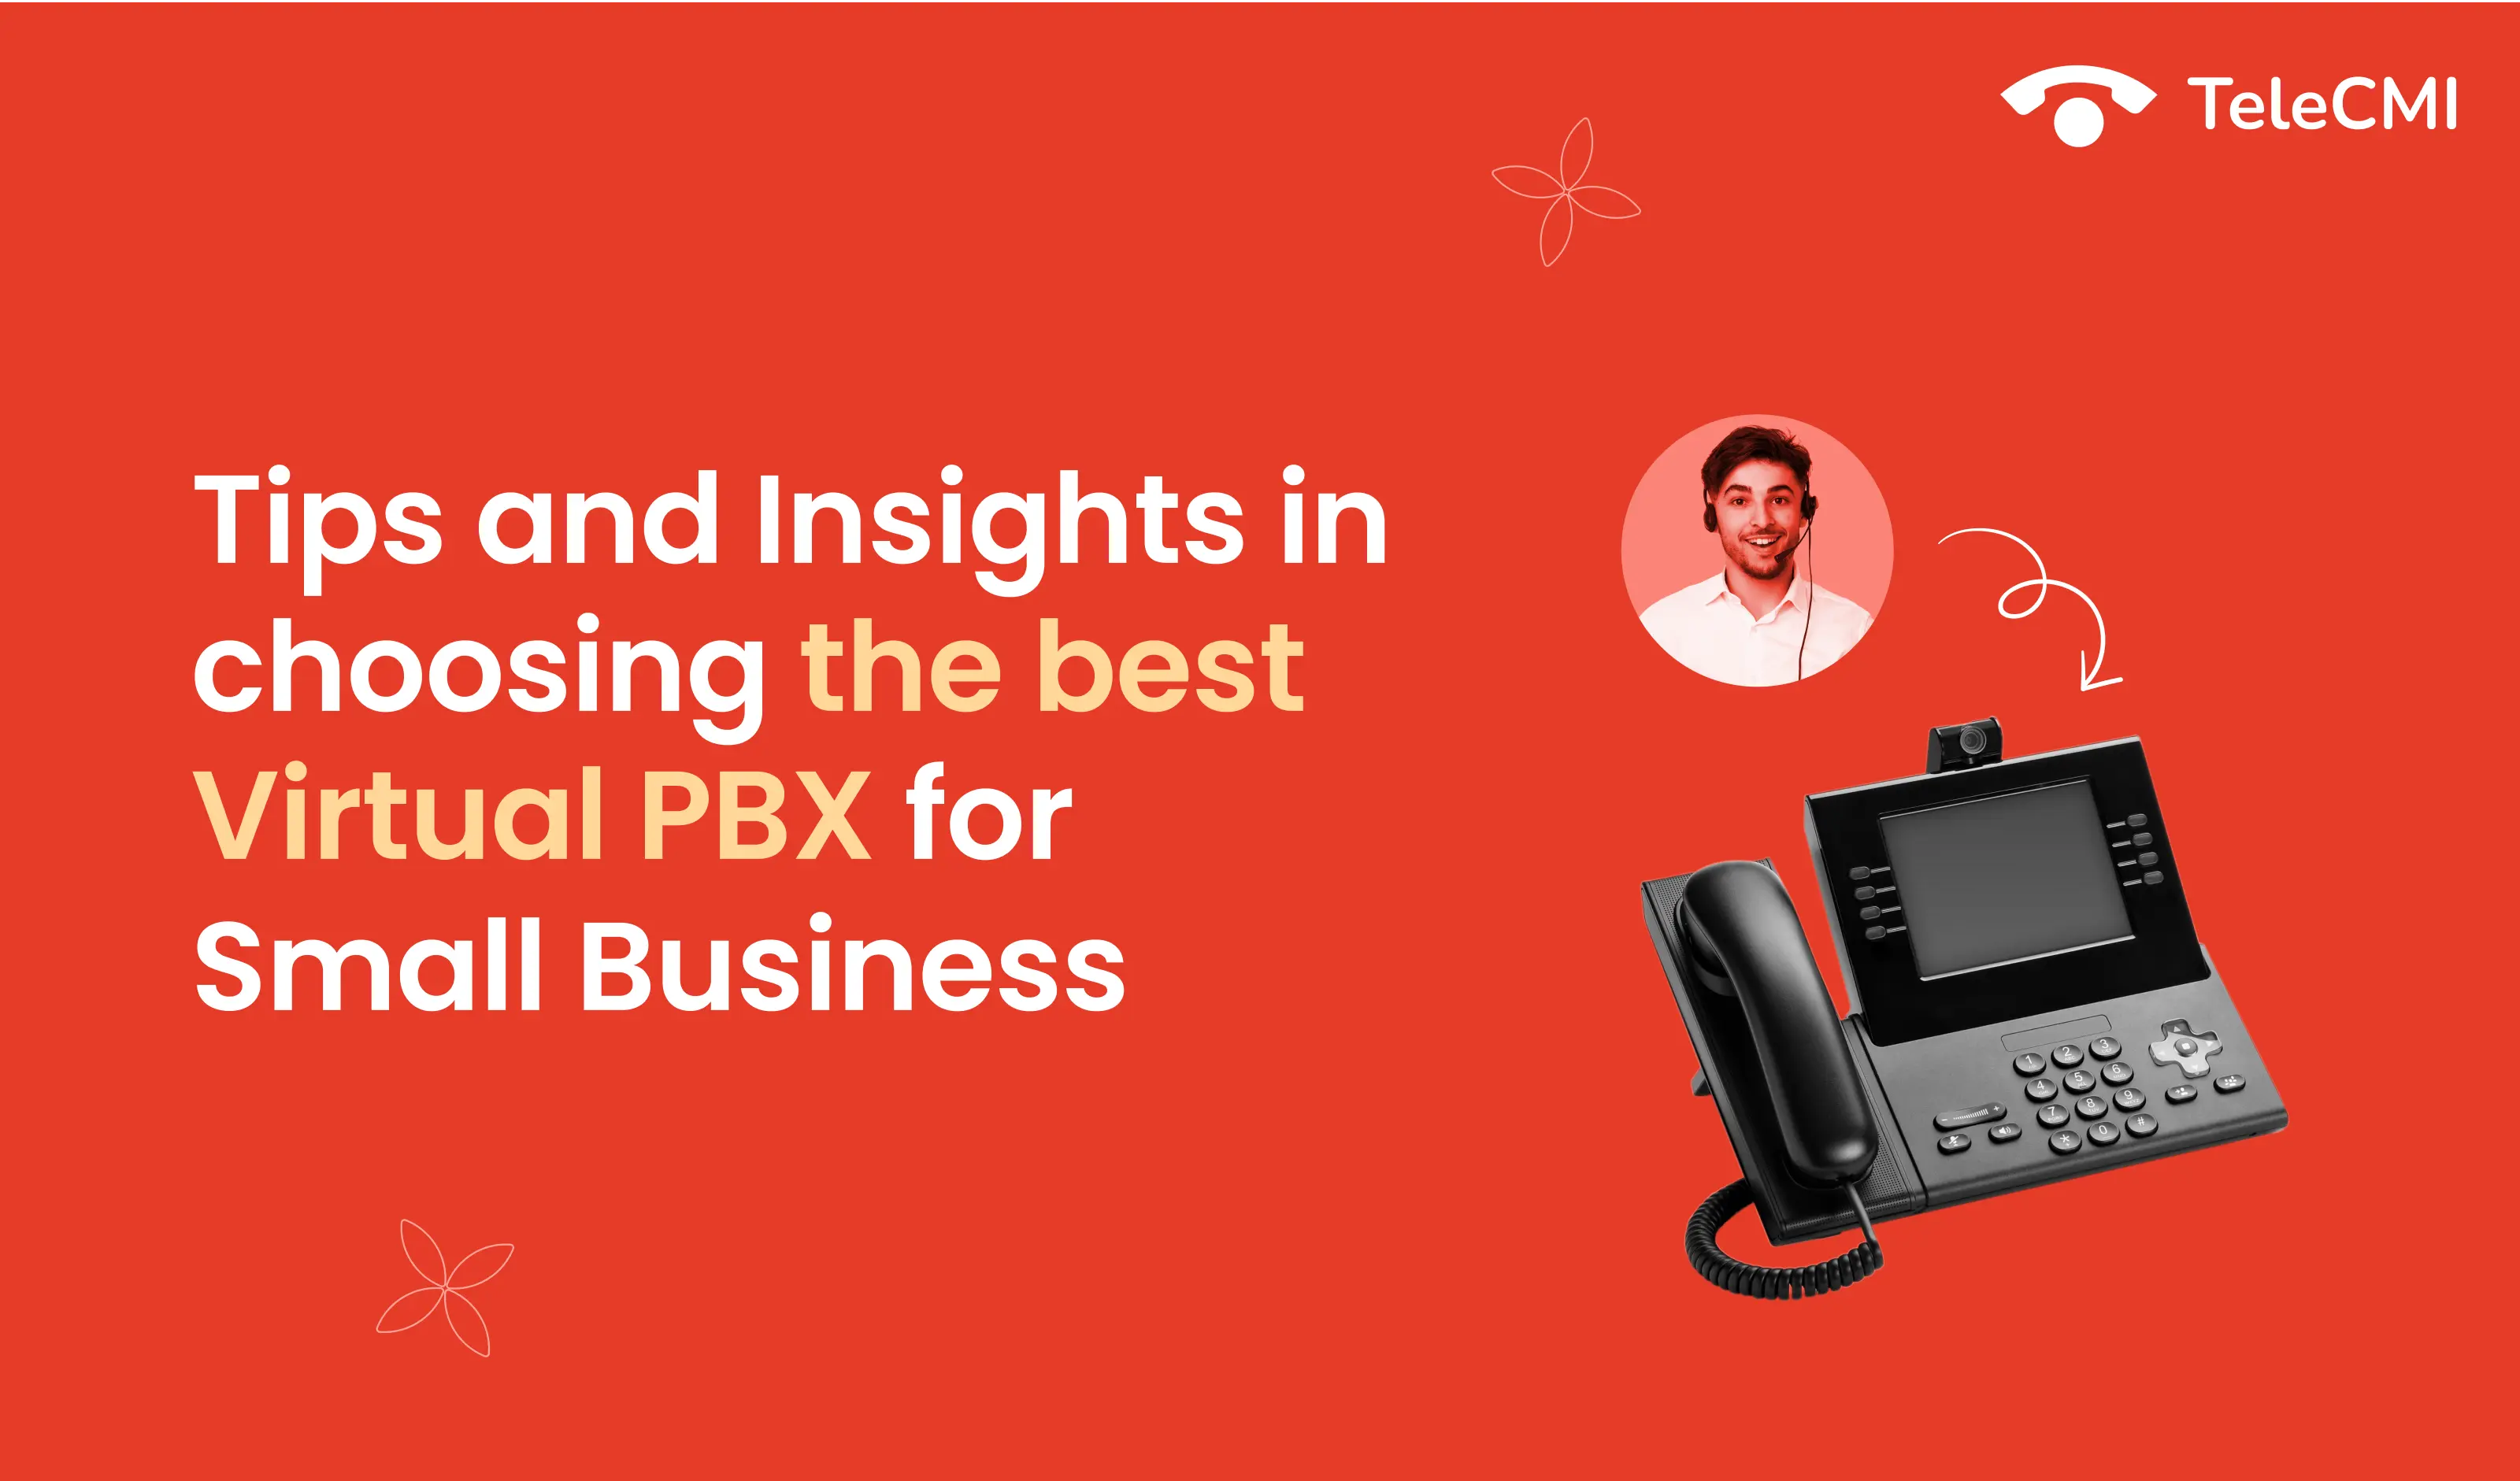 Tips and Insights in Choosing the Best Virtual PBX for Small Business